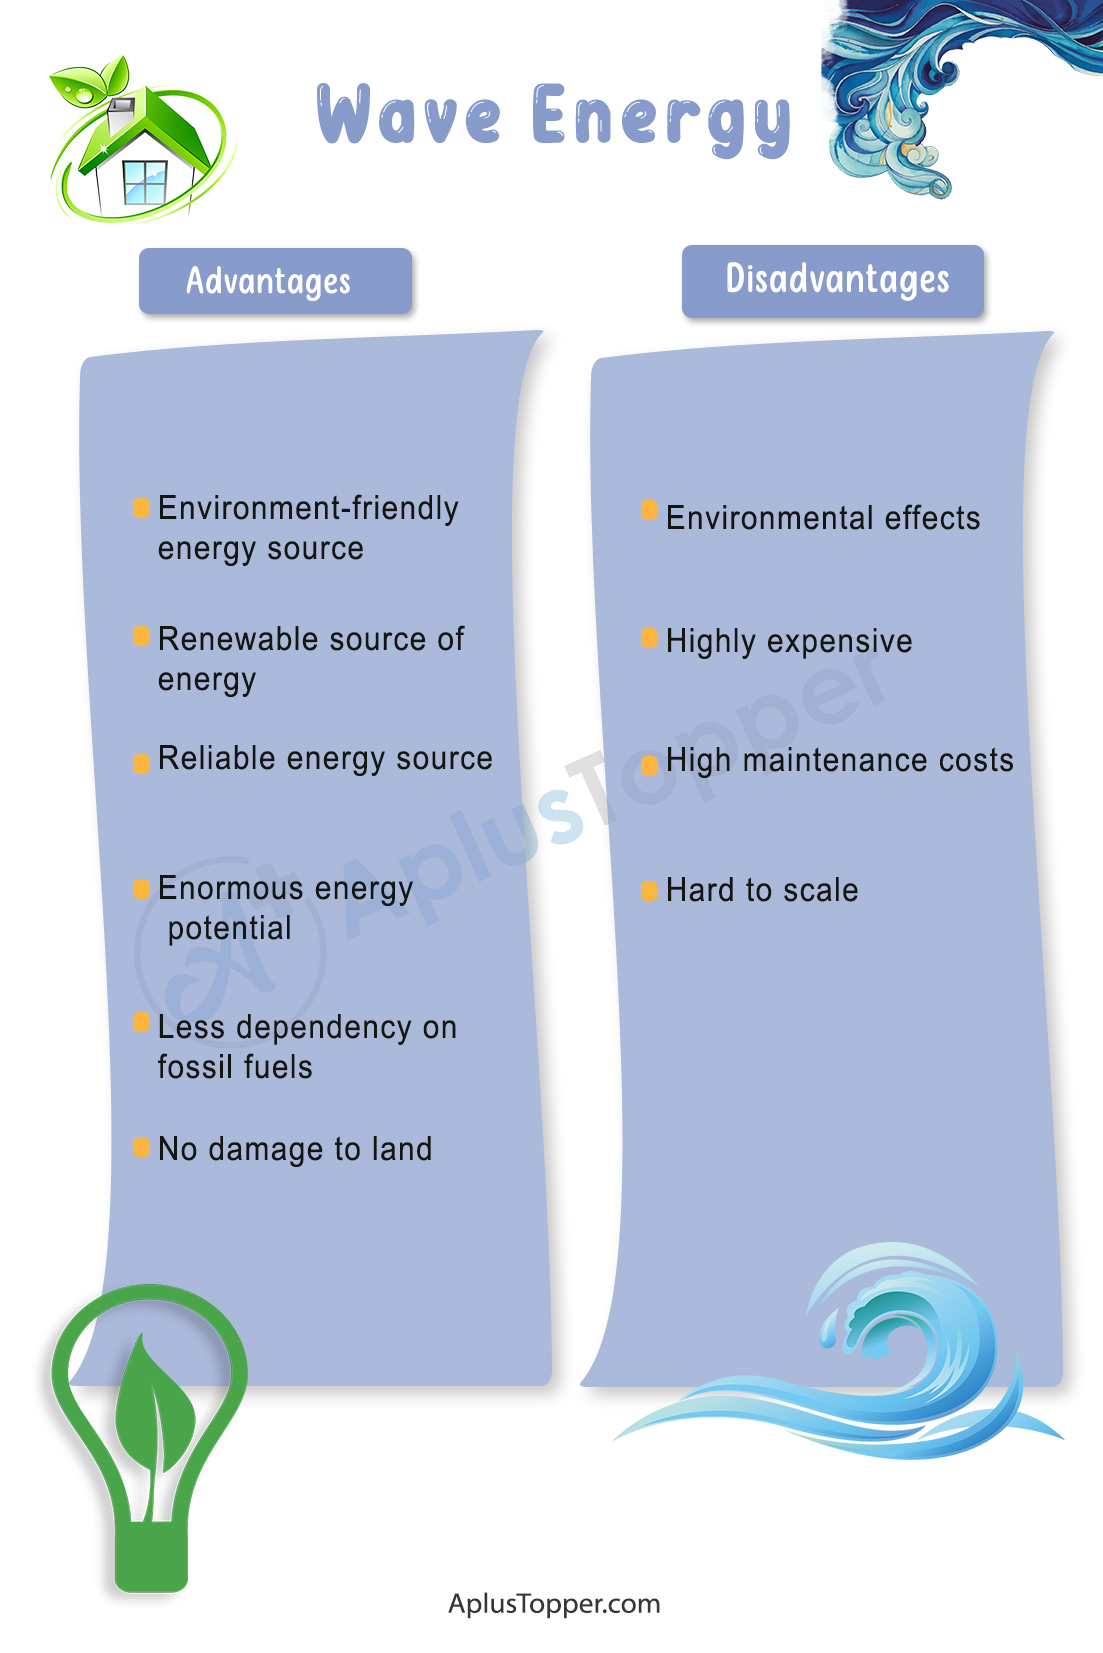 Advantages and Disadvantages of Wave Energy 2